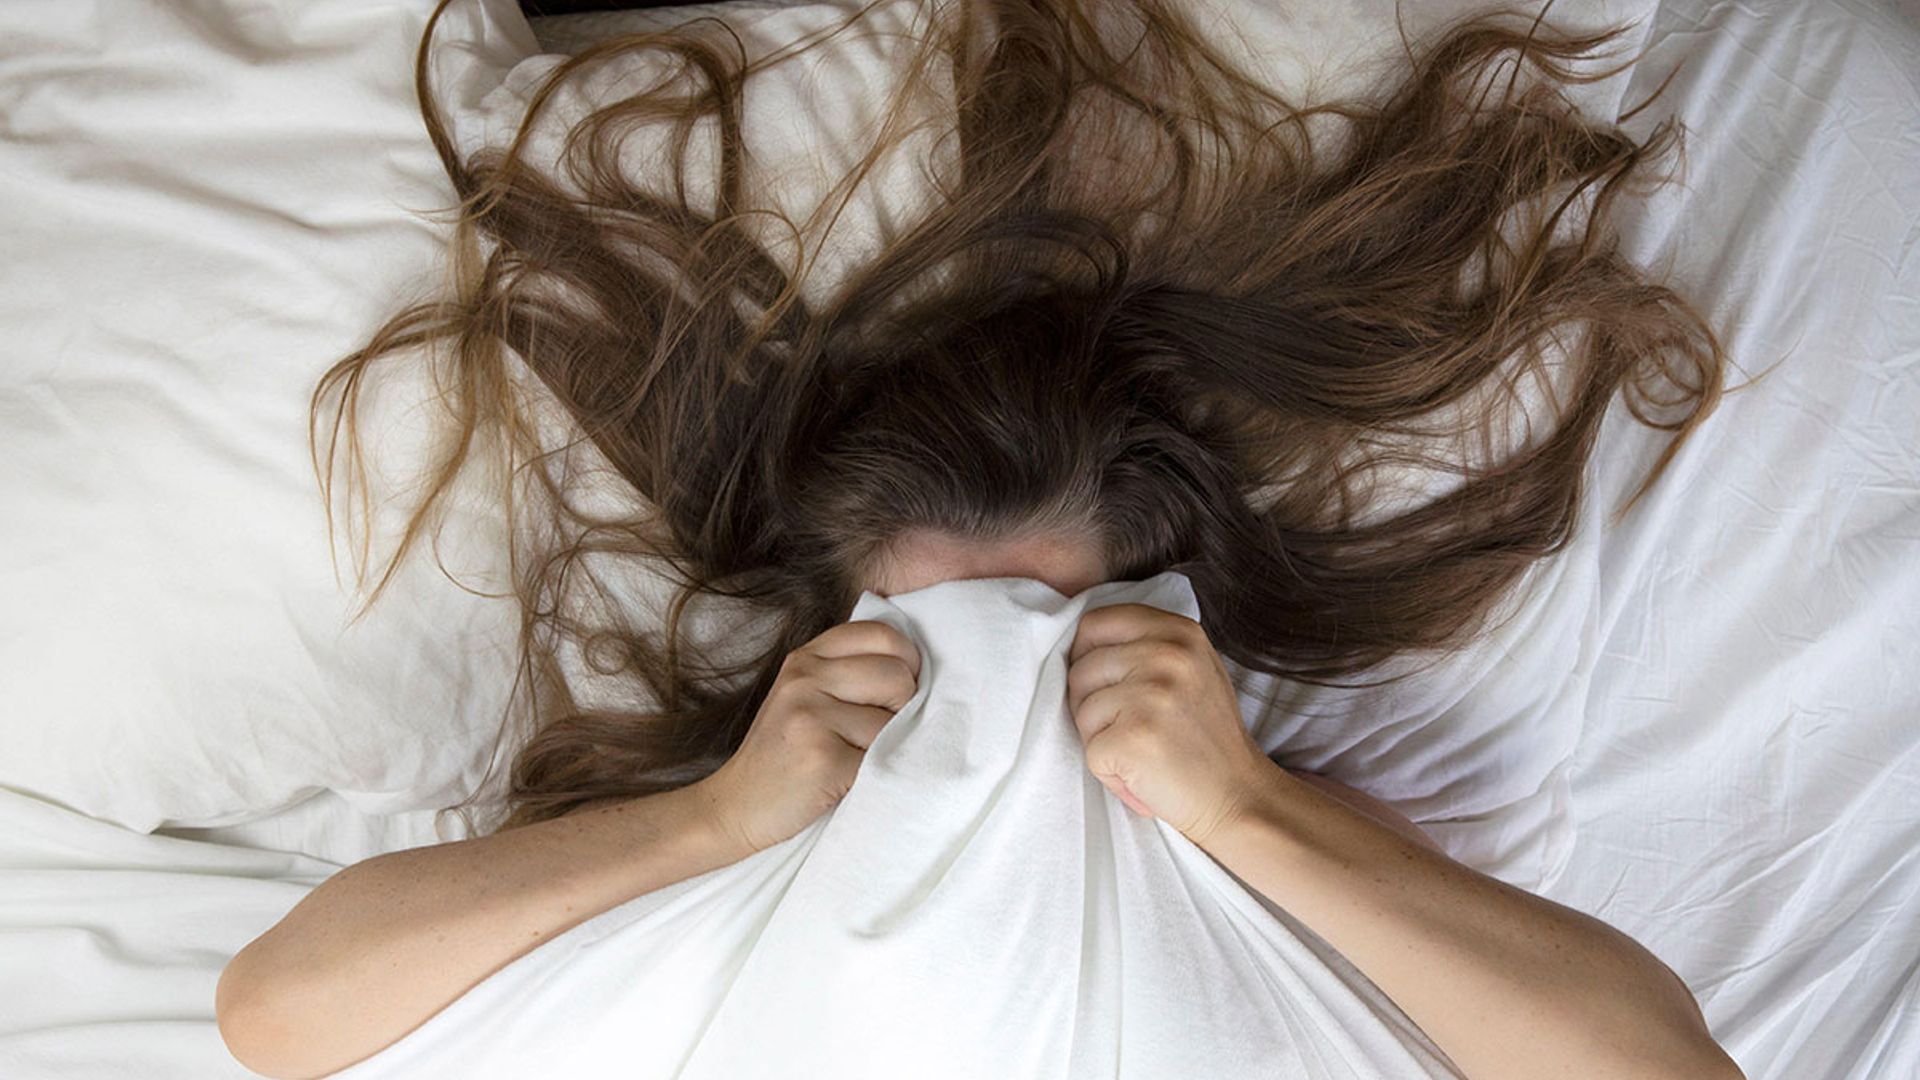 Having trouble falling asleep? Here are 4 ways to help you nod off, Everyday